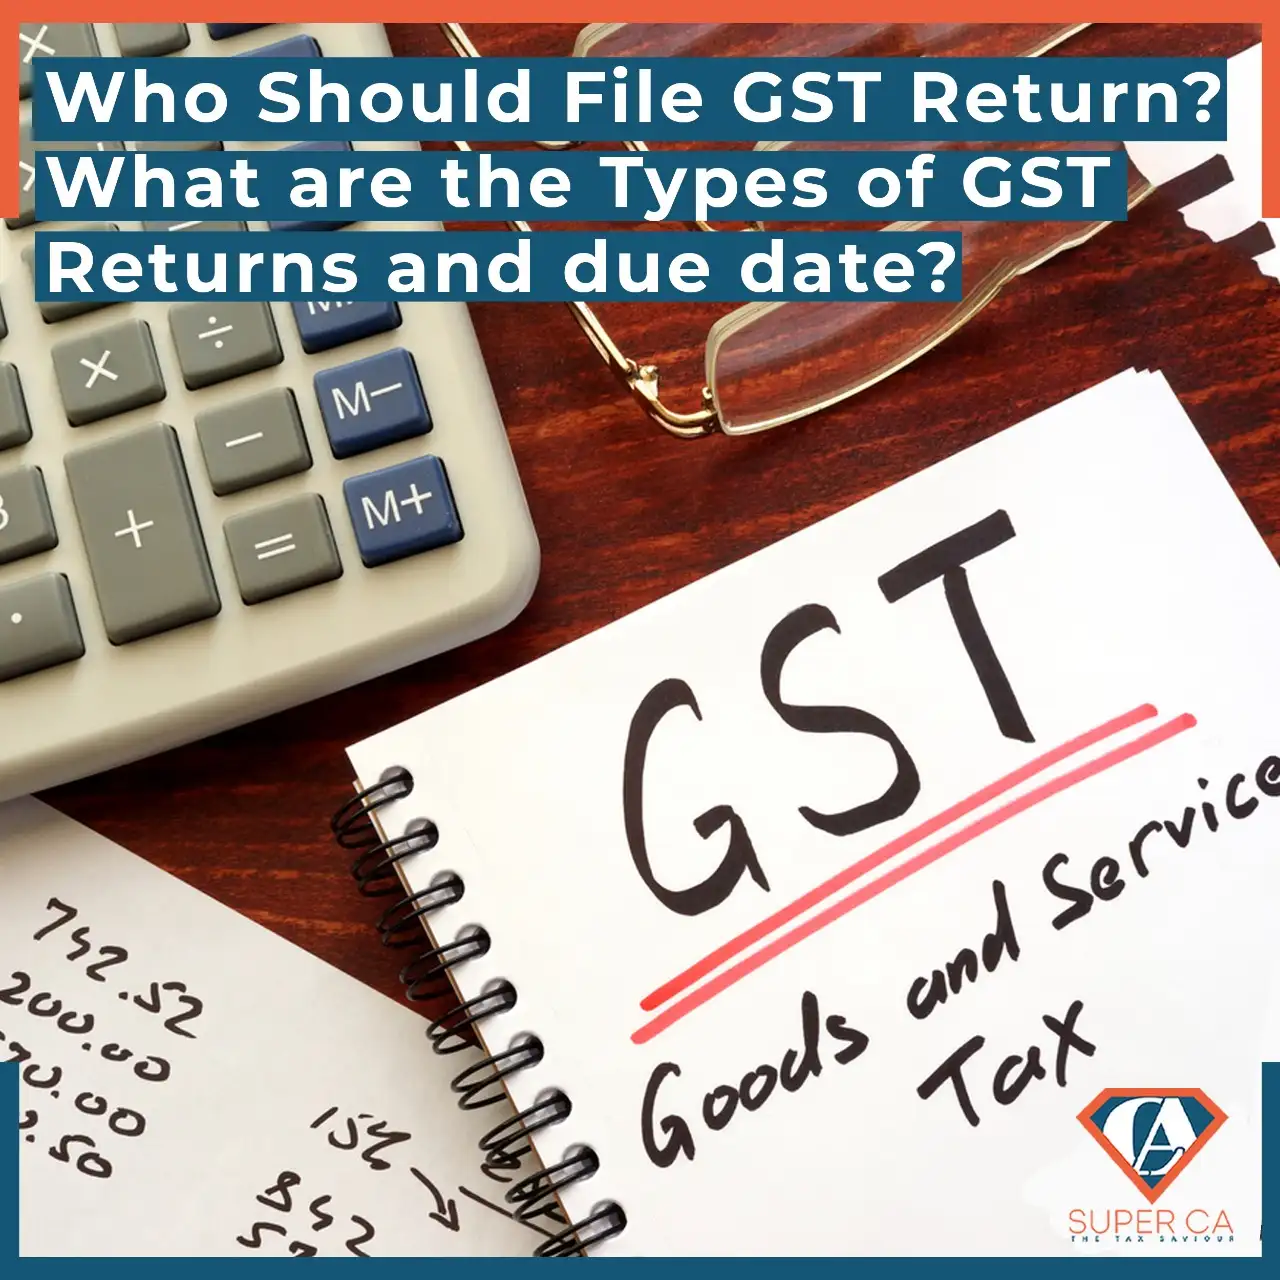 Who Should File GST Return? The Types of GST Returns & due date?